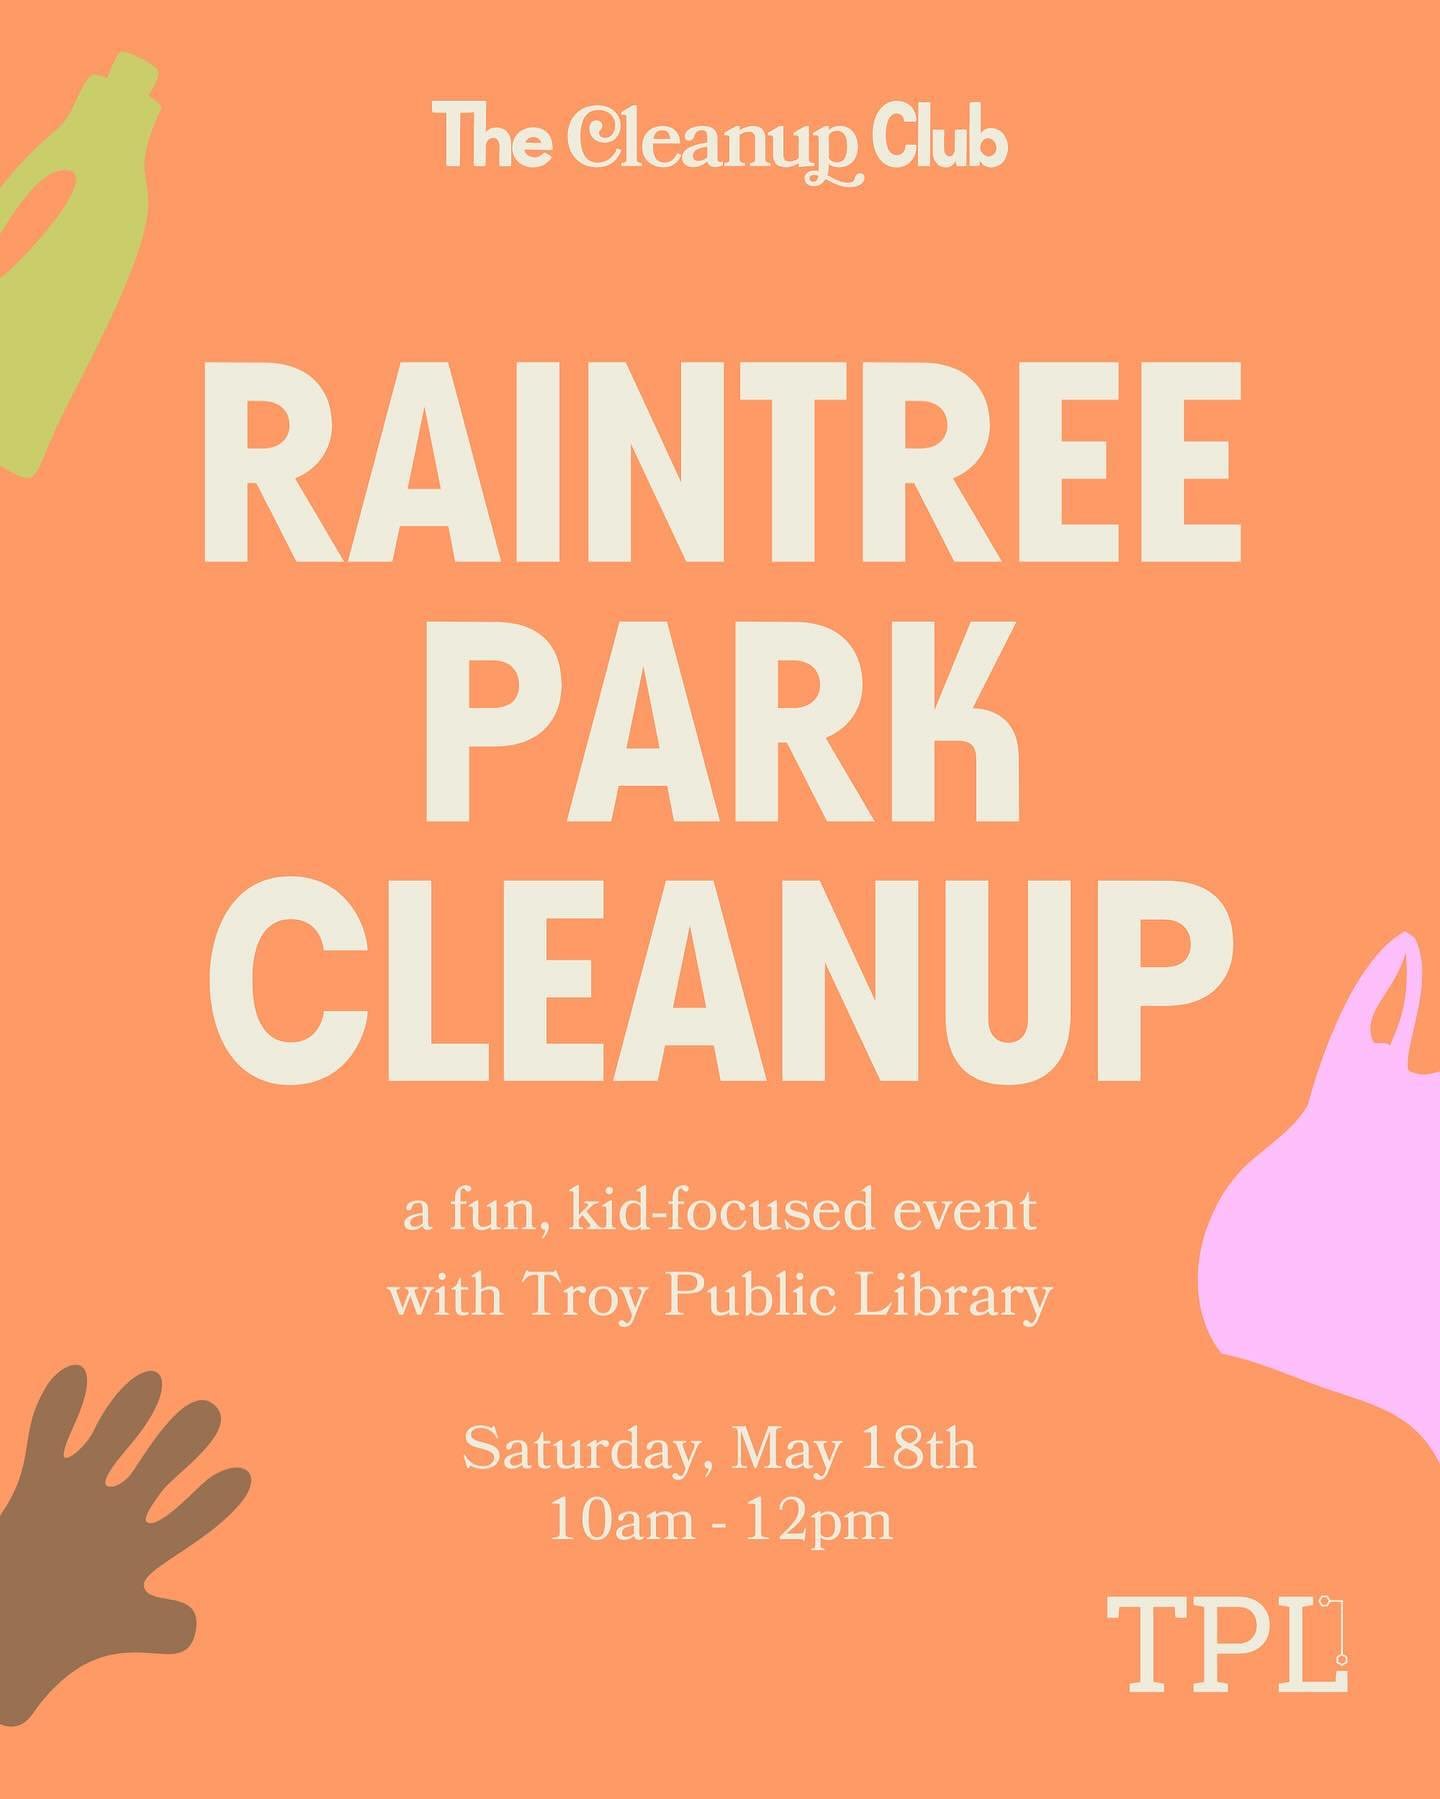 Calling all parents &amp; littles! 📣

Join The Cleanup Club and @troylib for a fun, kid-focused park cleanup on Saturday, May 18th! 🪣🧤

This event is a great way for kids to learn about the importance of protecting our communities &amp; Great Lake